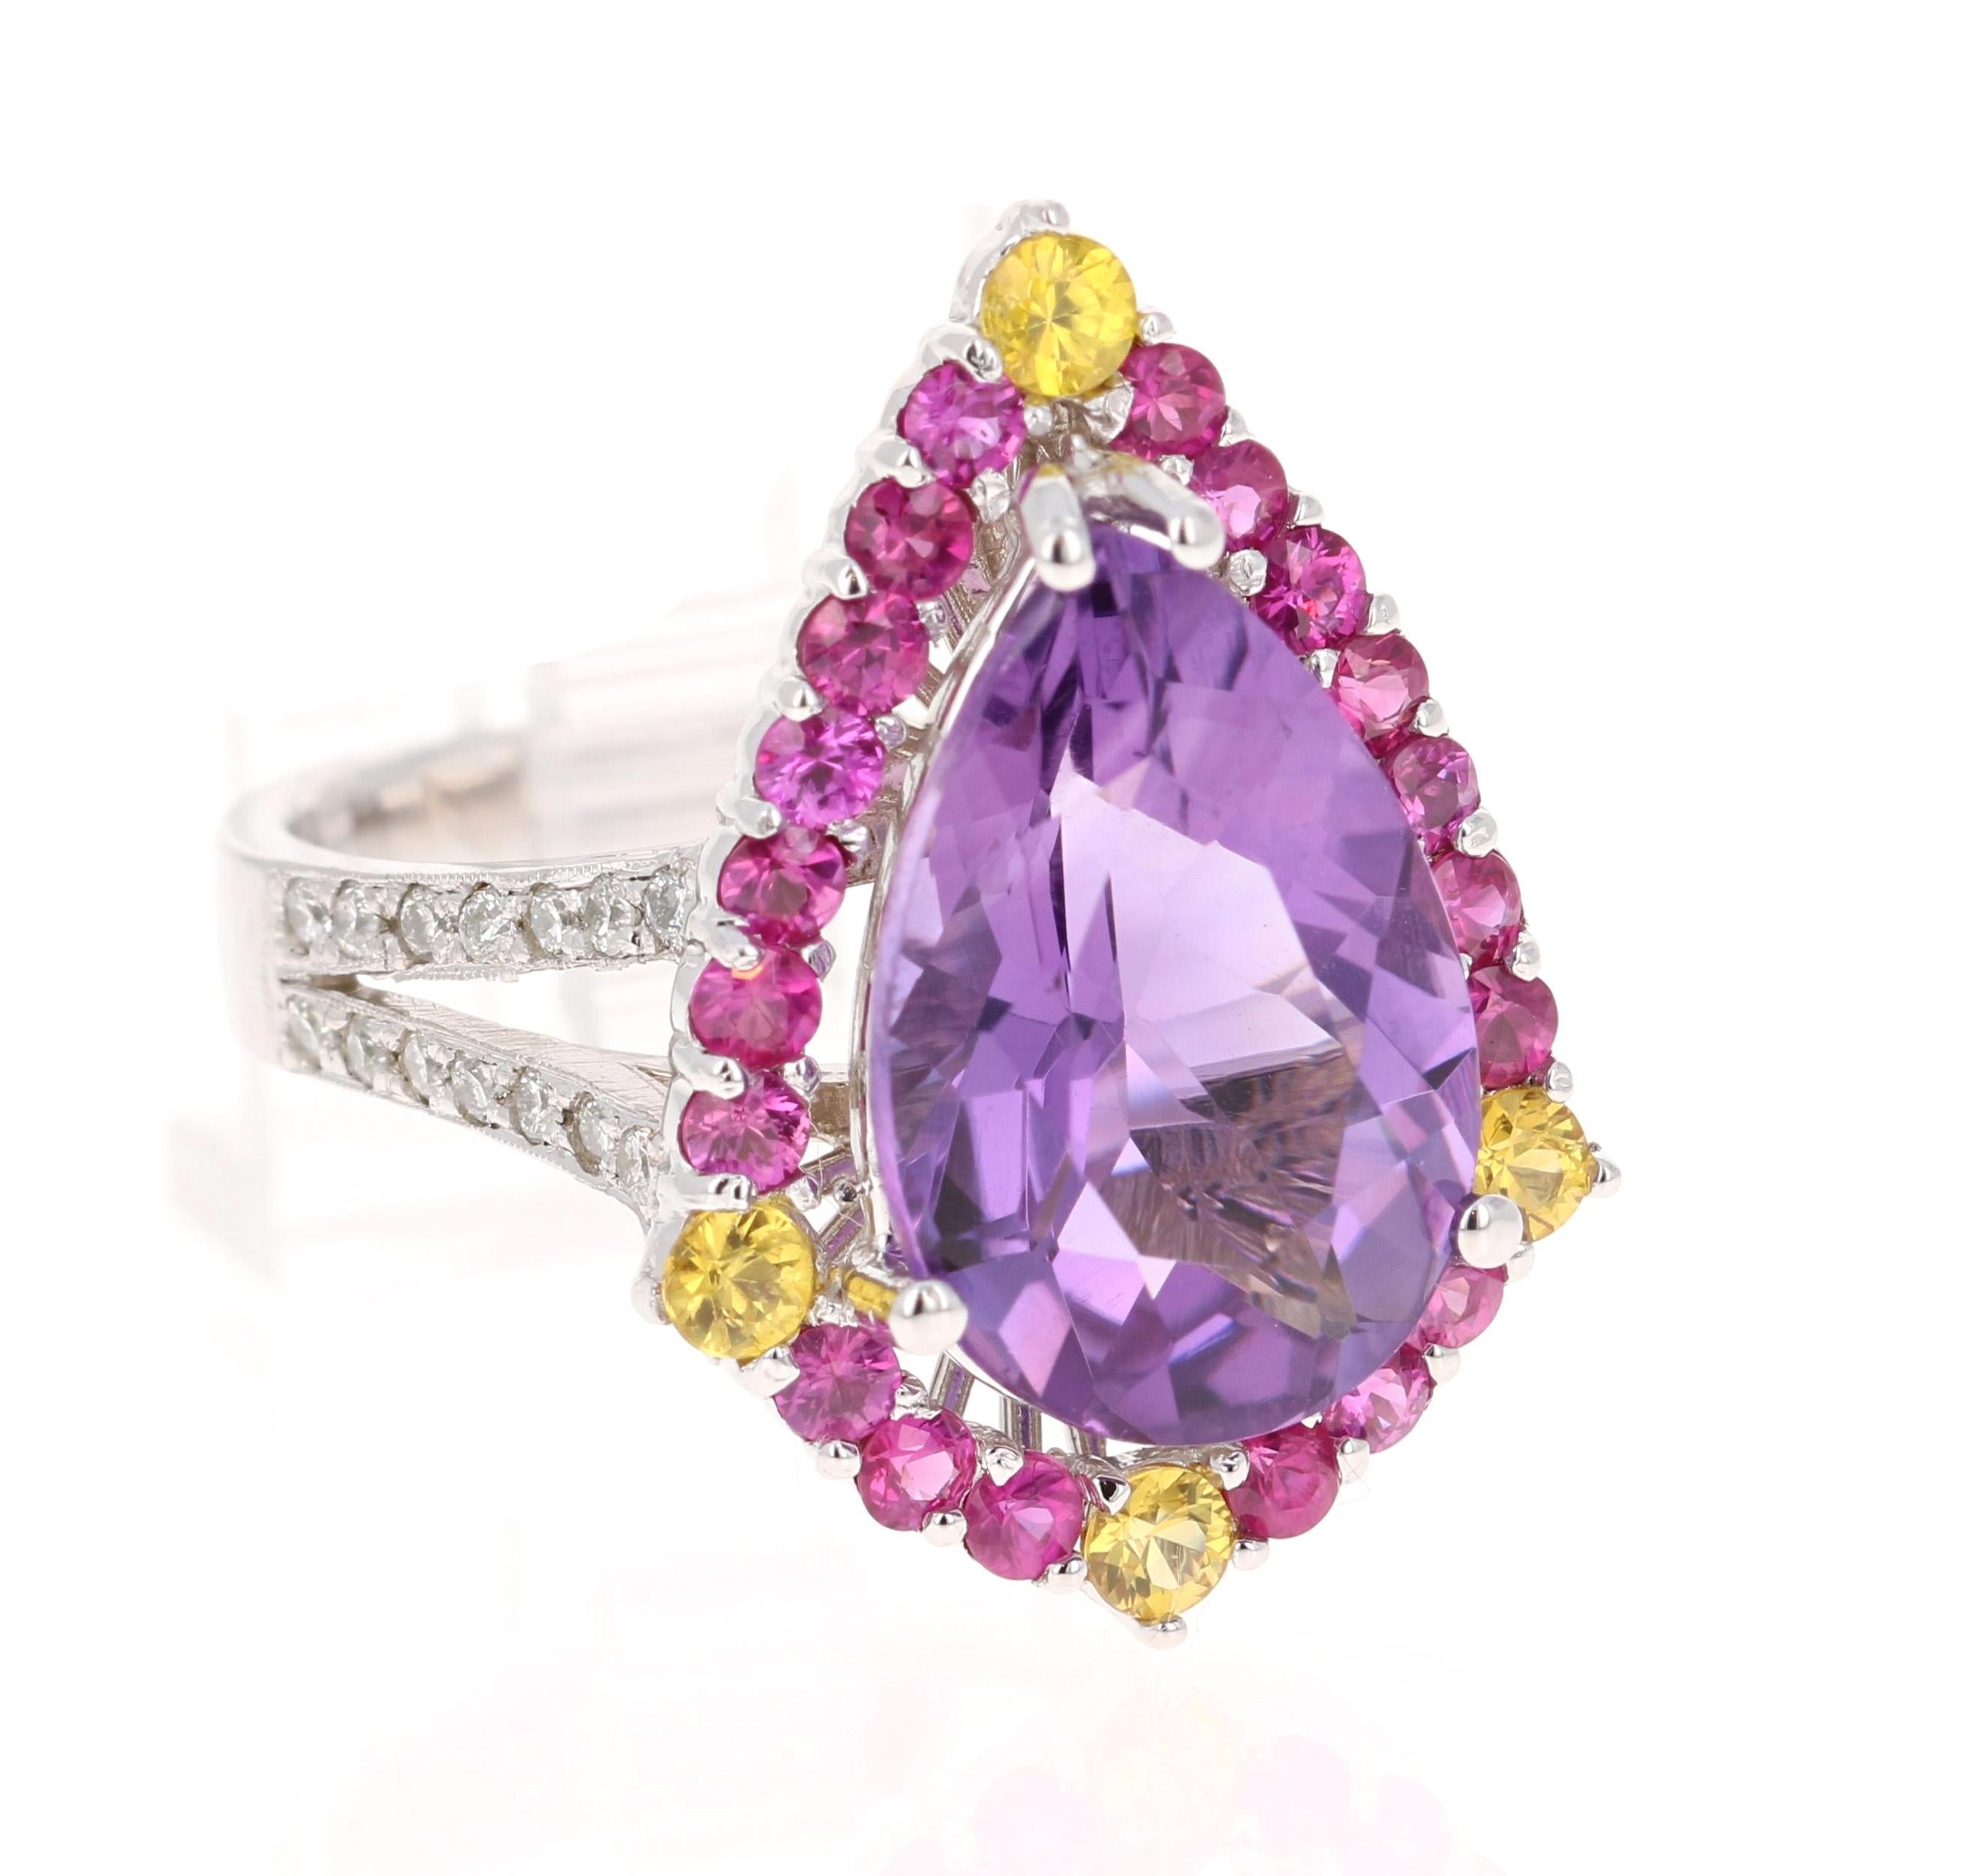 Amethyst Pink Sapphire Diamond White Gold Cocktail Ring

This unique beauty has a Pear Cut Amethyst weighing 5.08 carats and has a halo of Round Cut Pink Sapphires that weigh 0.86 carats along with a sprinkle of Yellow Sapphires that weigh 0.33